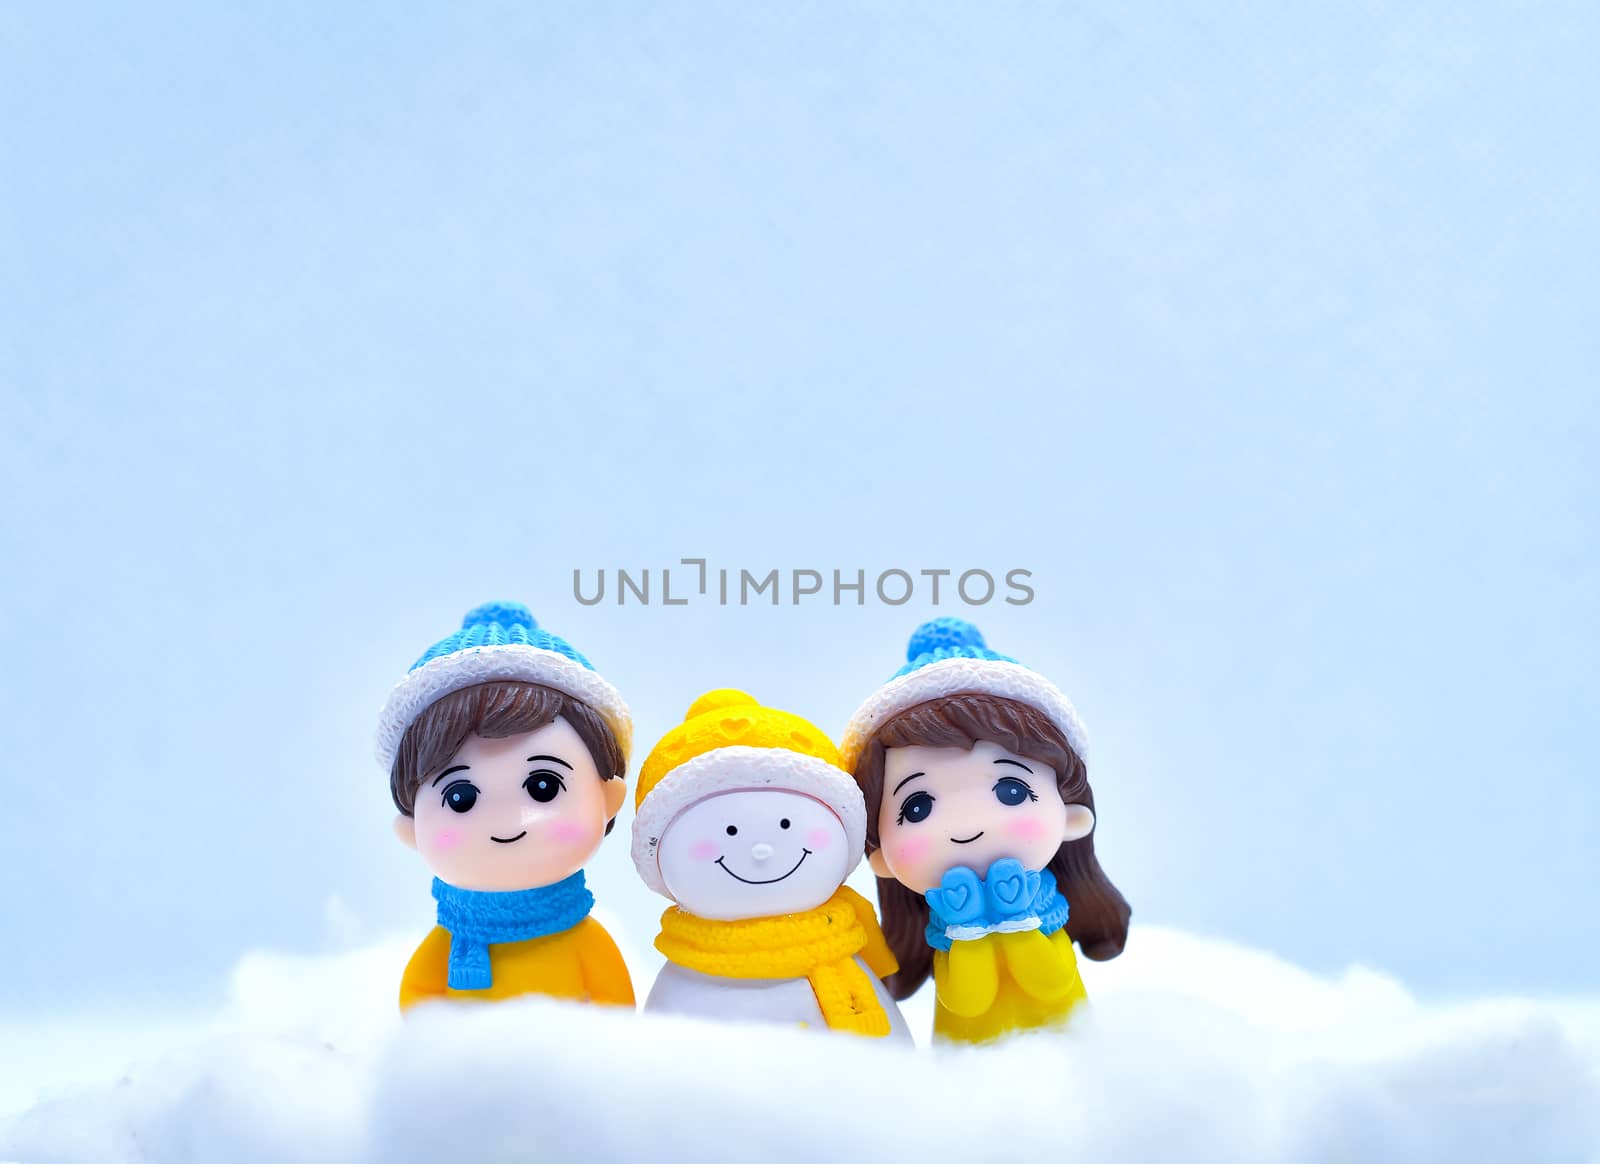 Tourism and travel concept: Miniature people in winter snow along with little snowman by rkbalaji